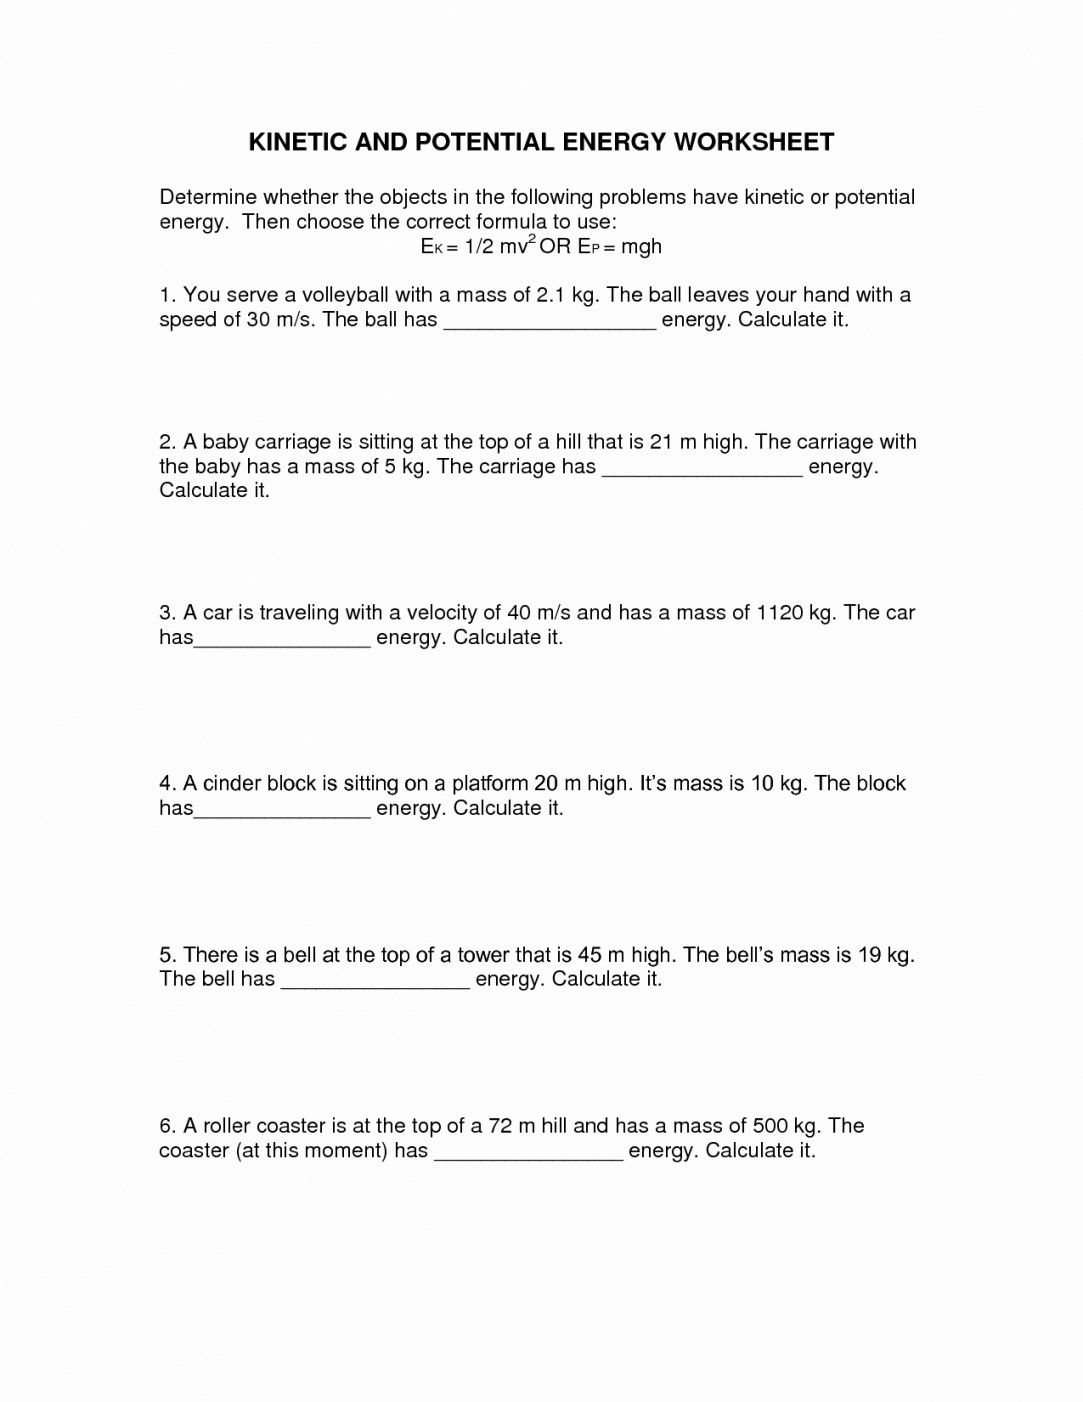 Kinetic And Potential Energy Worksheet Answers | Lostranquillos - Free Printable Worksheets On Potential And Kinetic Energy